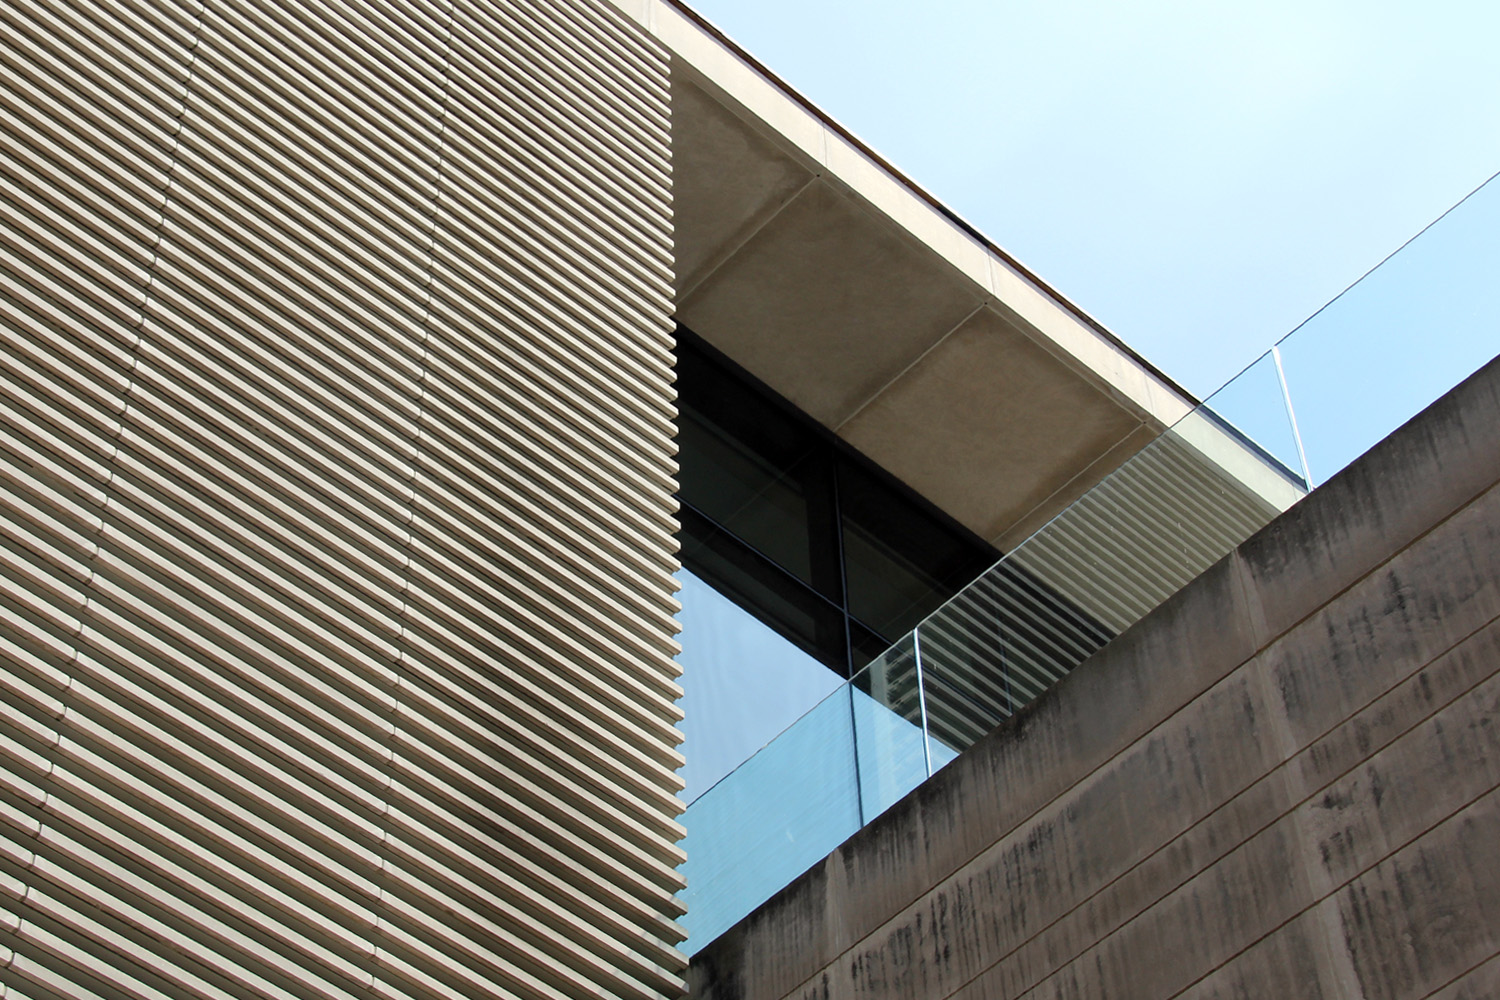 Abstract architecture shot of the exterior of the Gardiner Museum